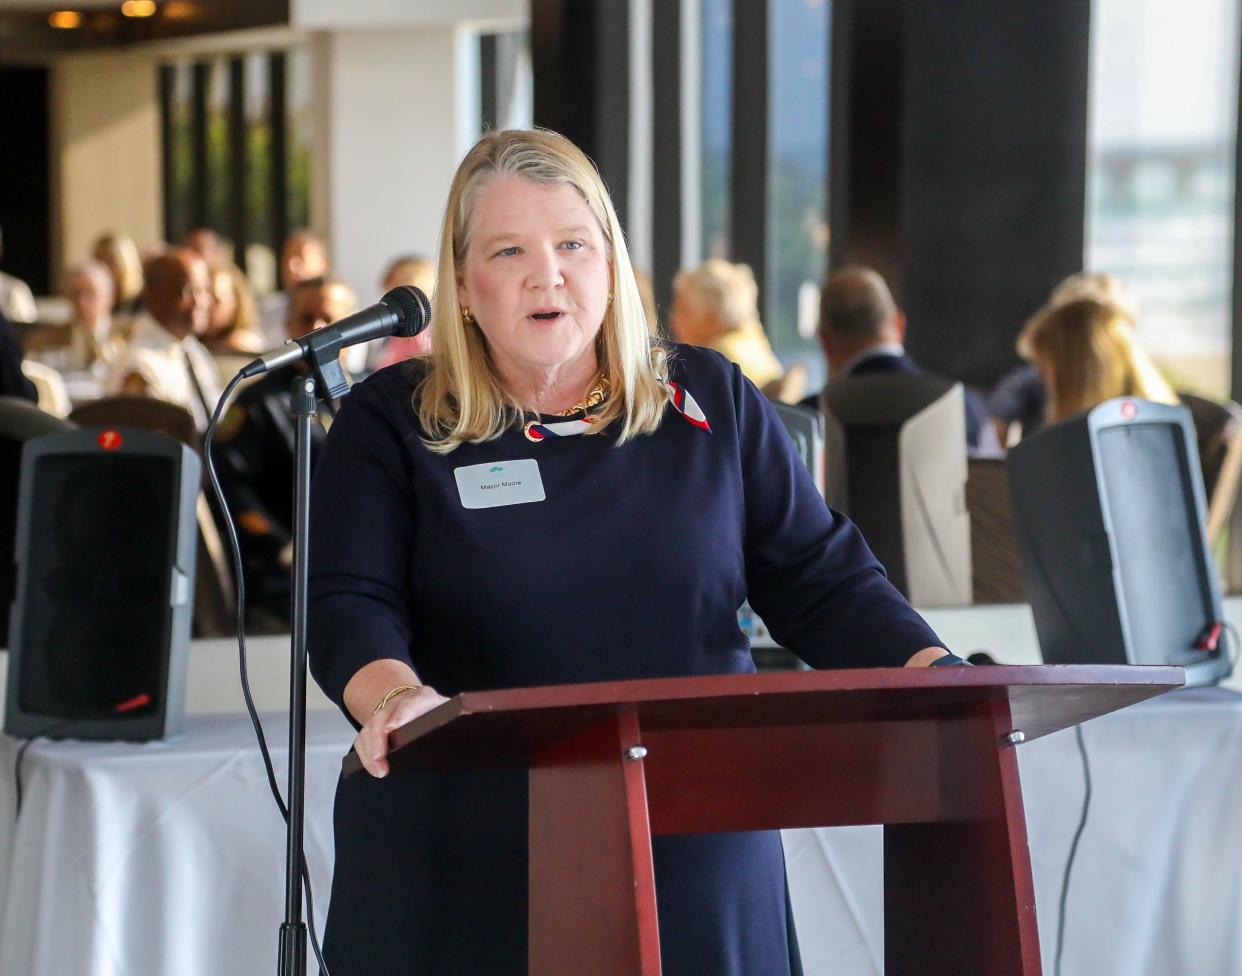 Mayor Danielle Moore shares her Town Report during the Citizens' Association of Palm Beach’s annual meeting in March. She has announced that she will seek re-election.